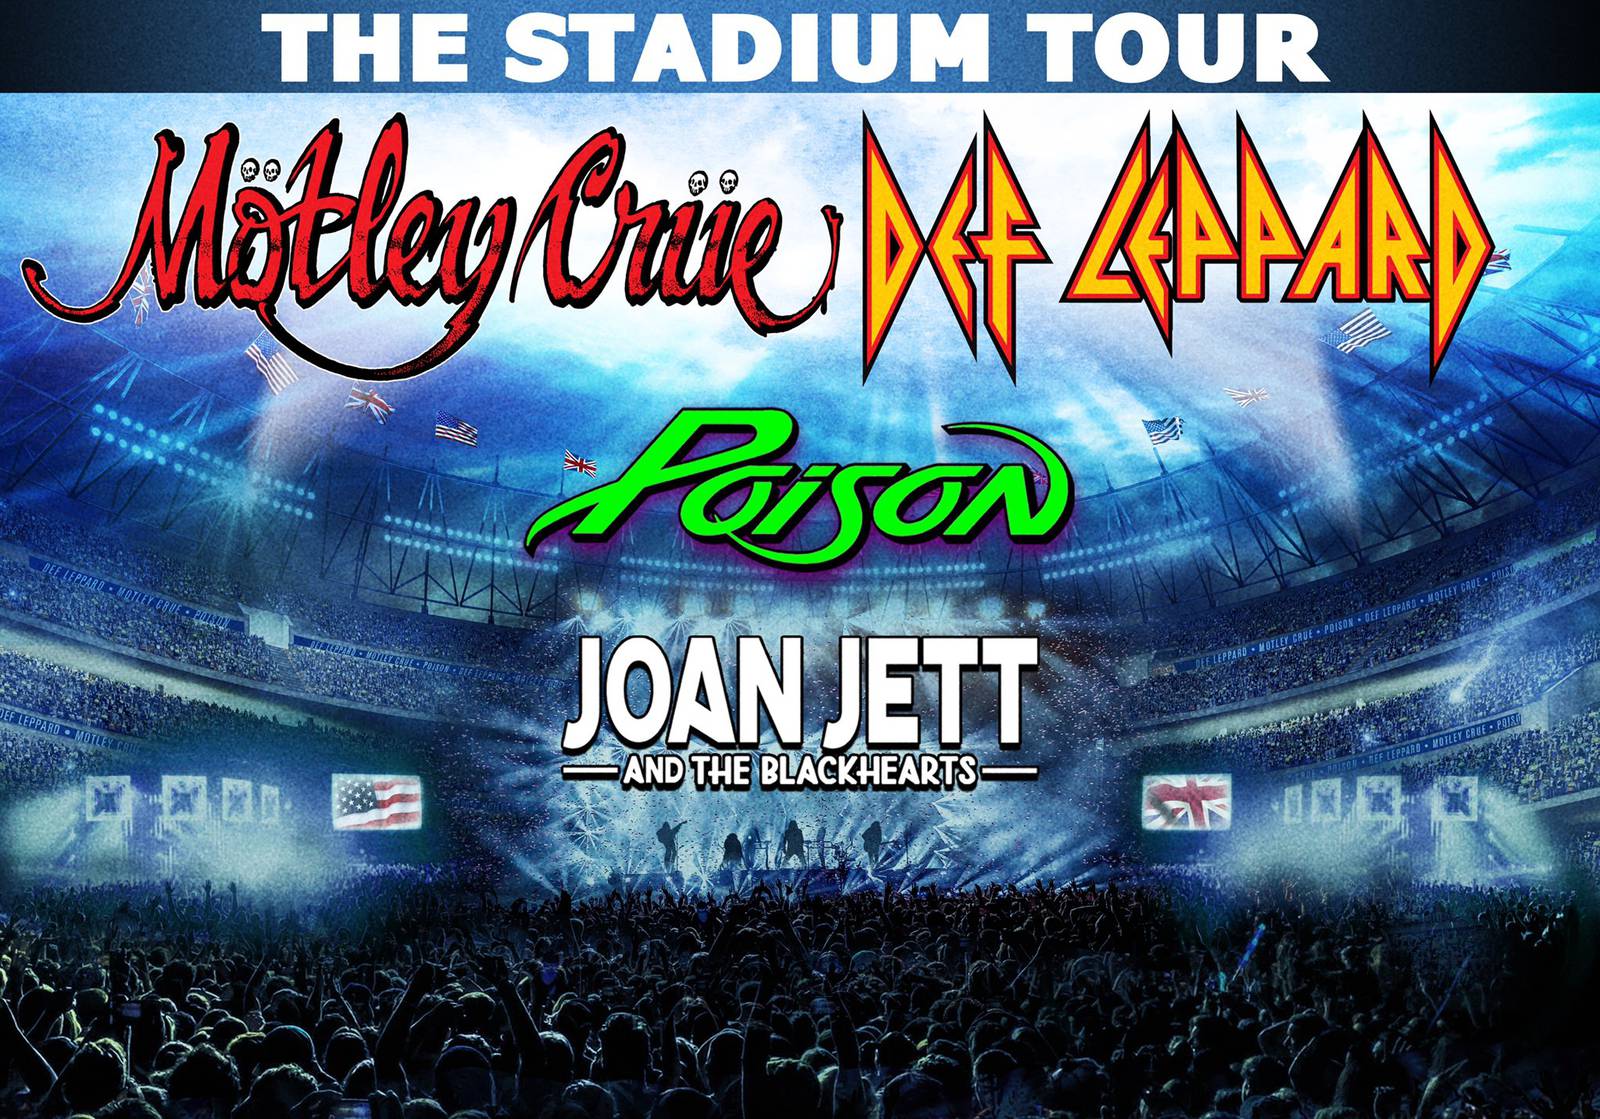 Rock legends coming to Jacksonville for The Stadium Tour in June 104.